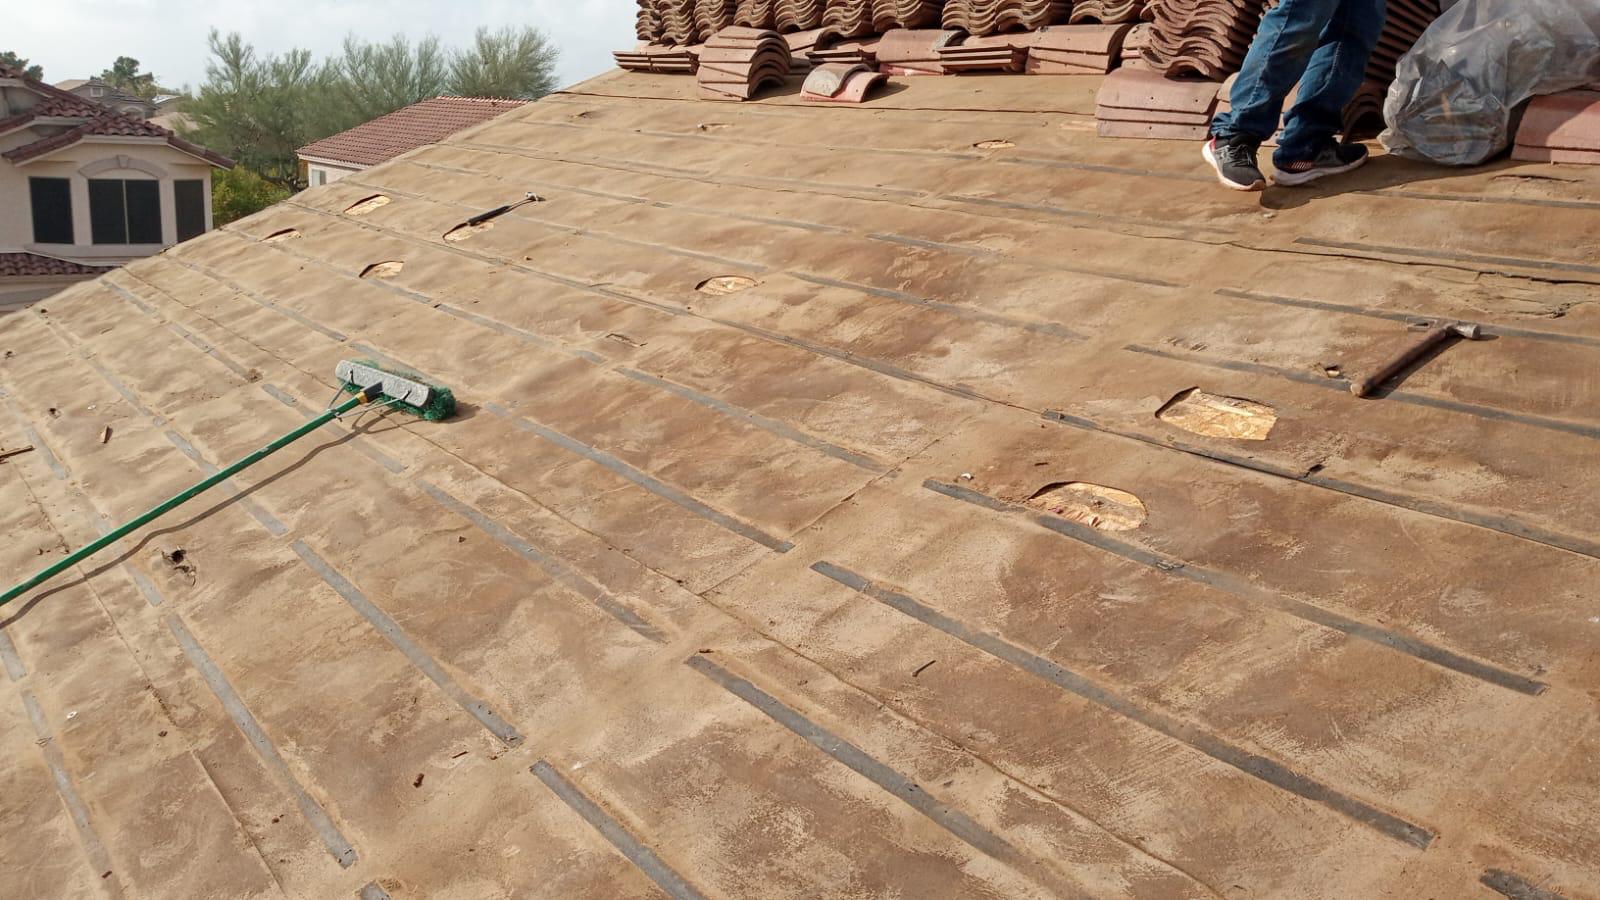 A man is working on the roof of a house in Grayhawk, re-felting the tiles.